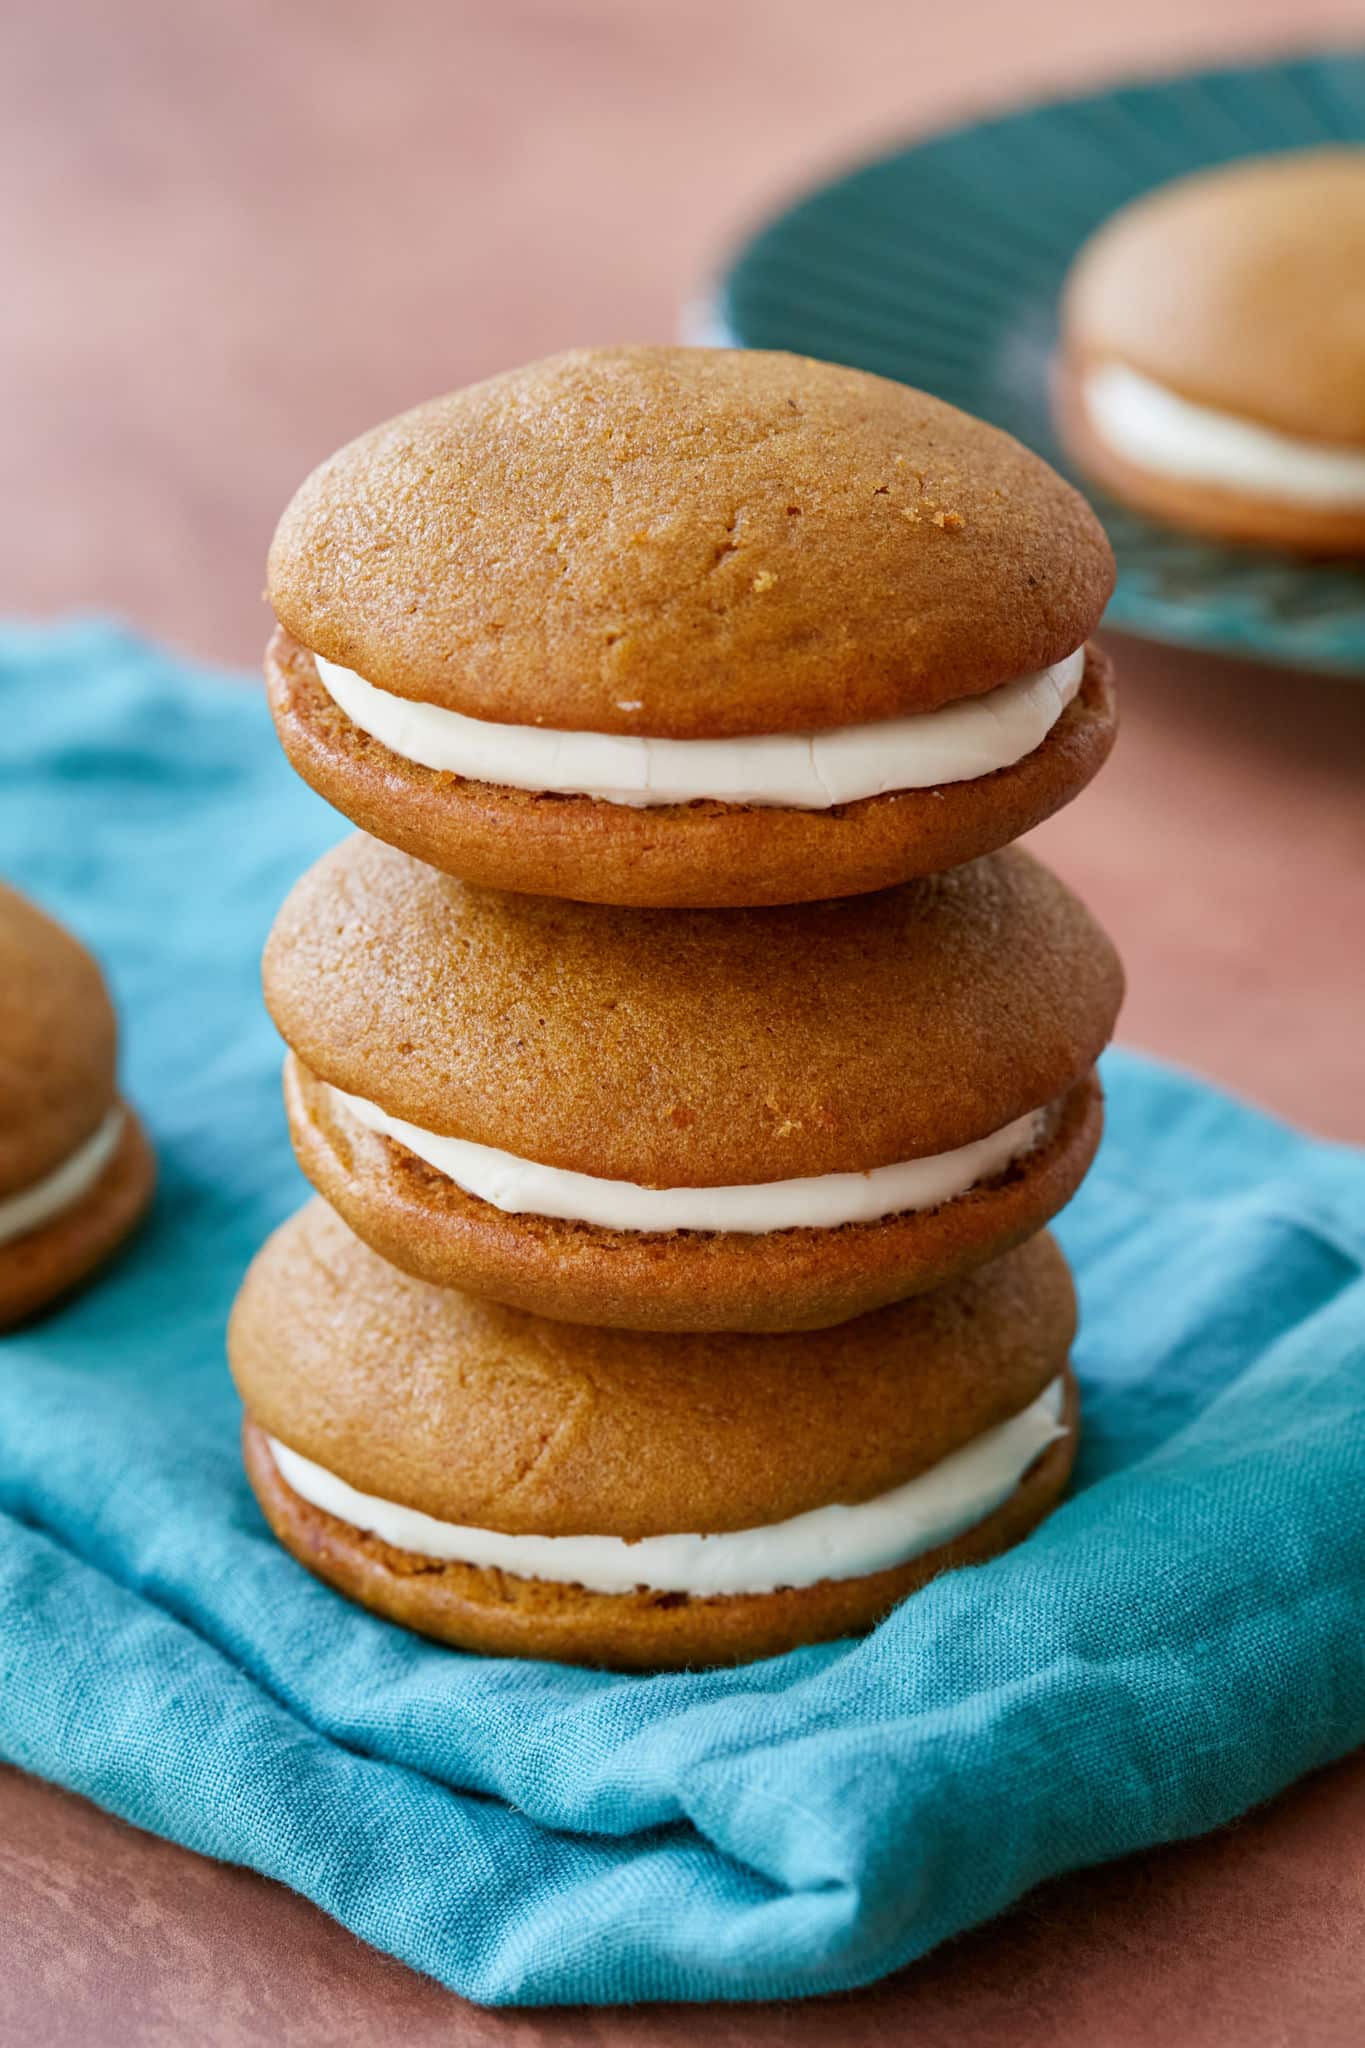 A stack of whoopie pies filled with cream on a cloth.